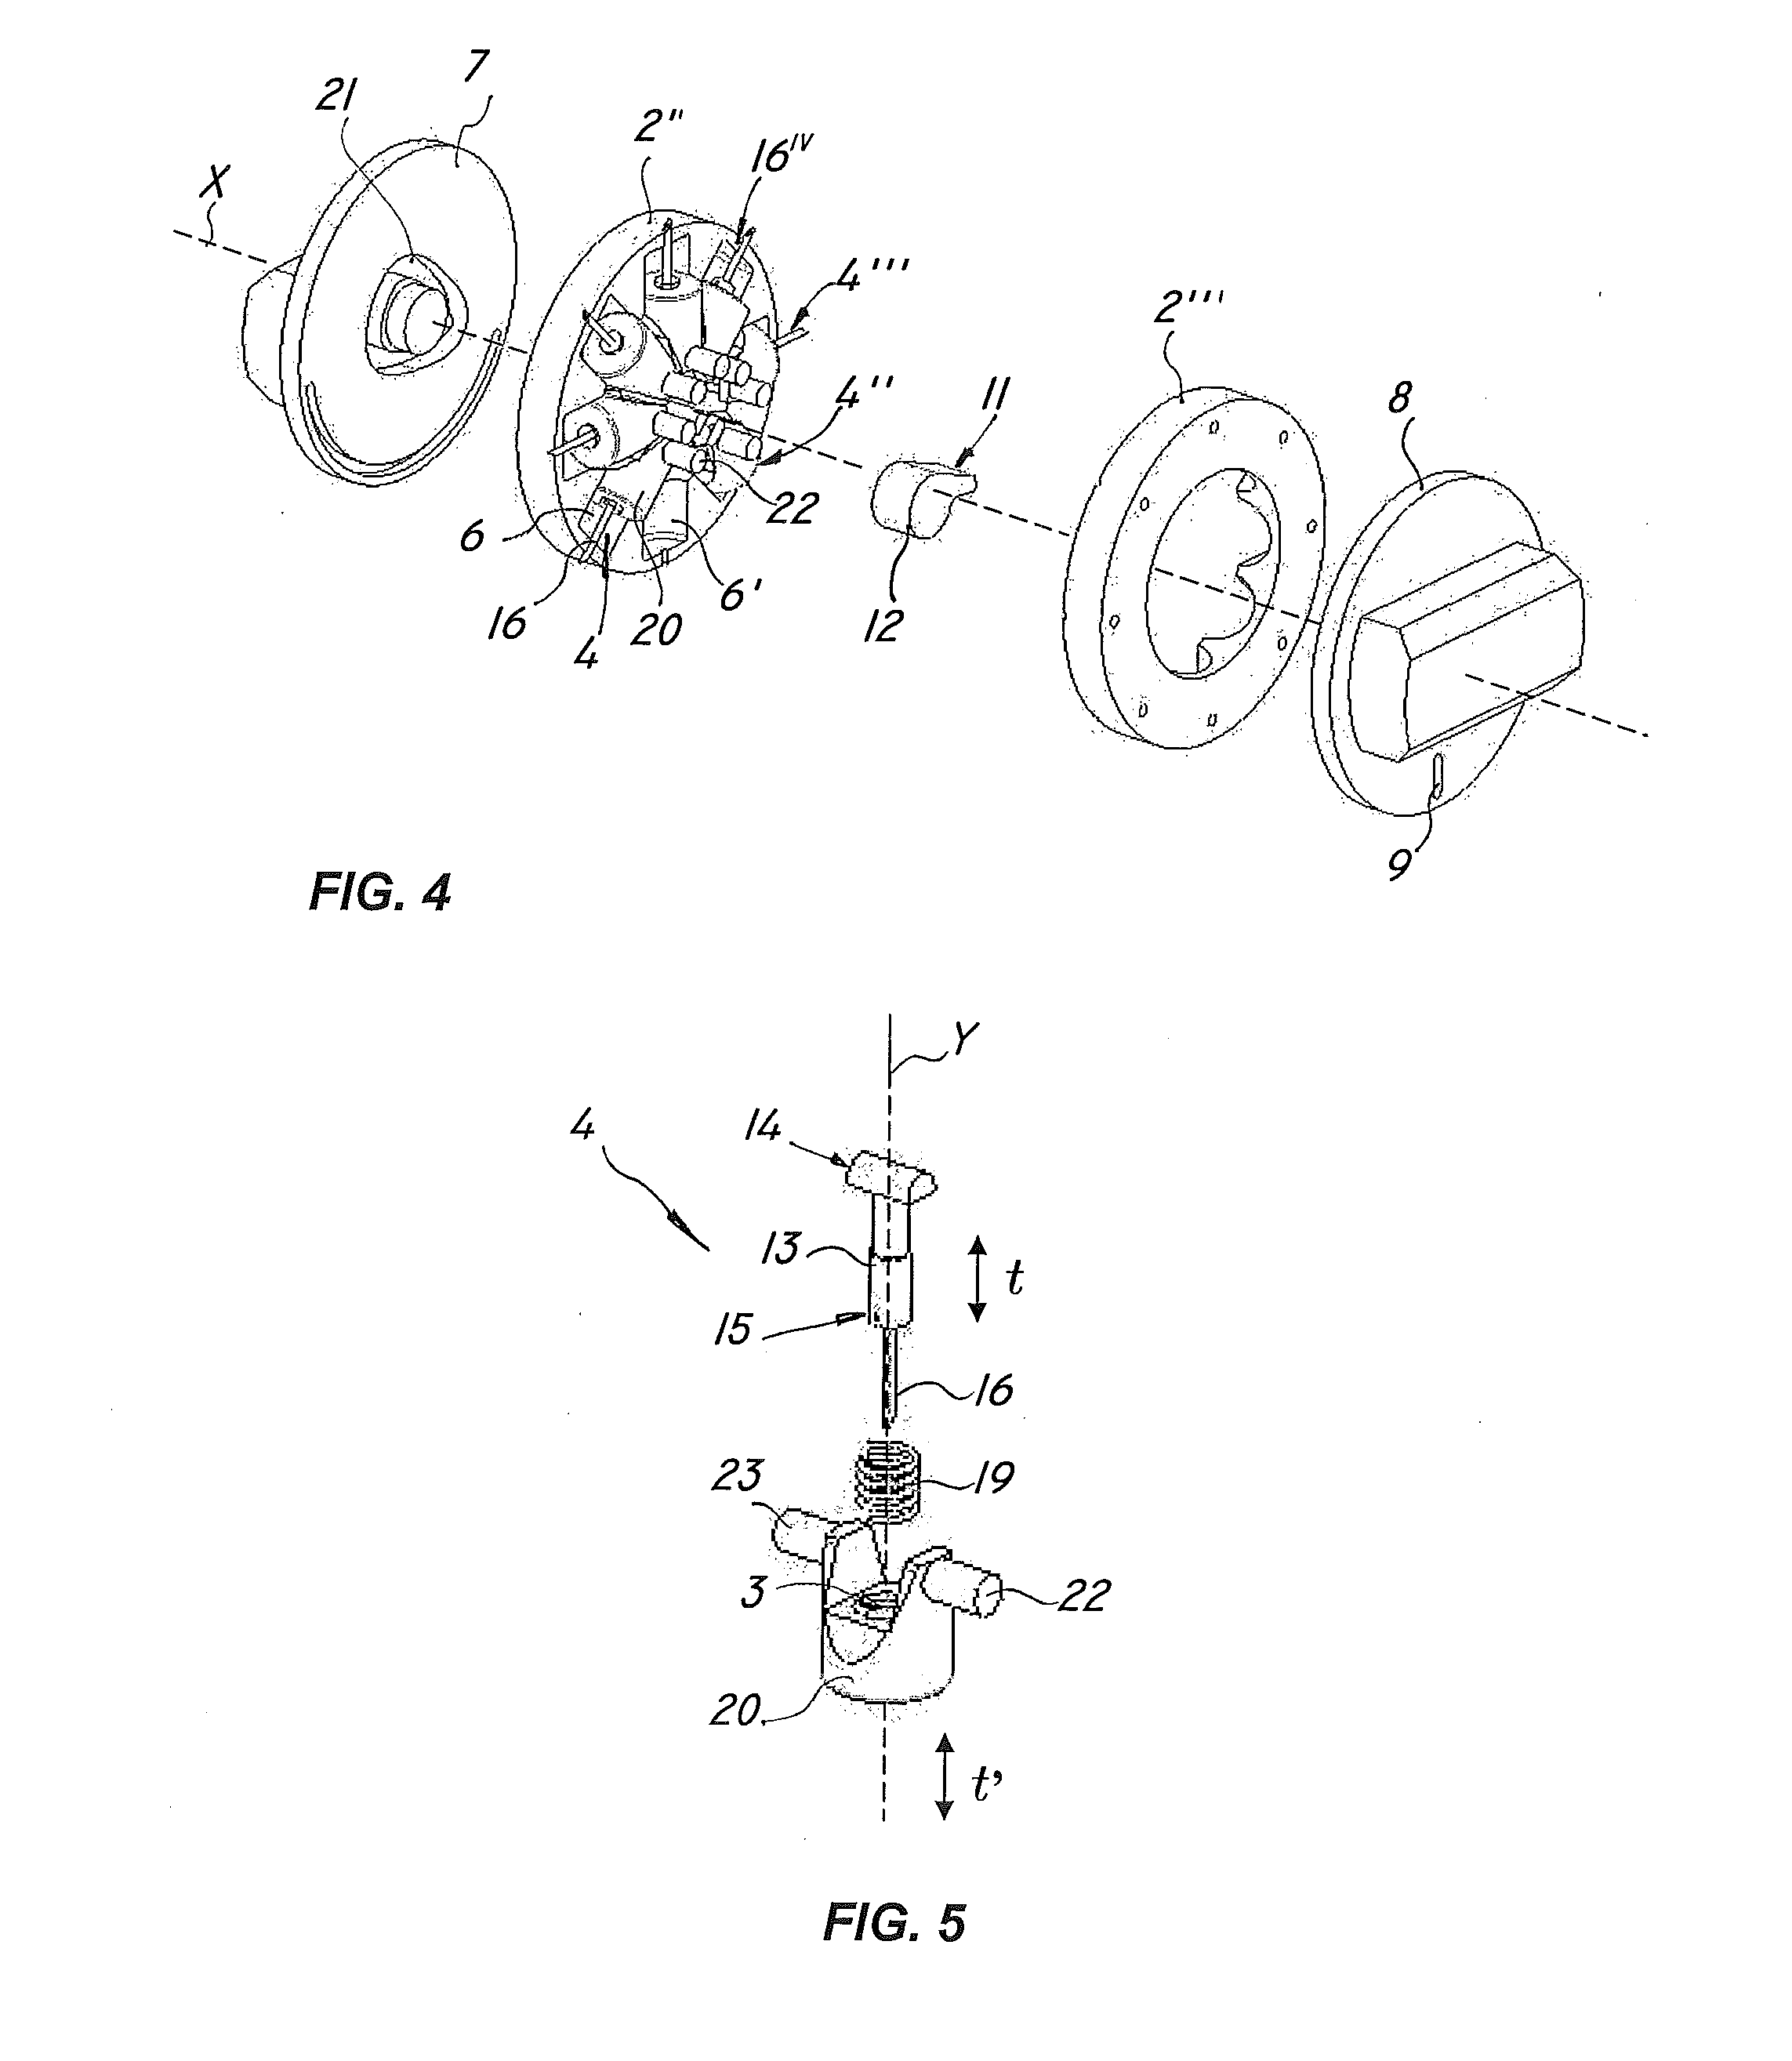 Multiple-injection medical apparatus